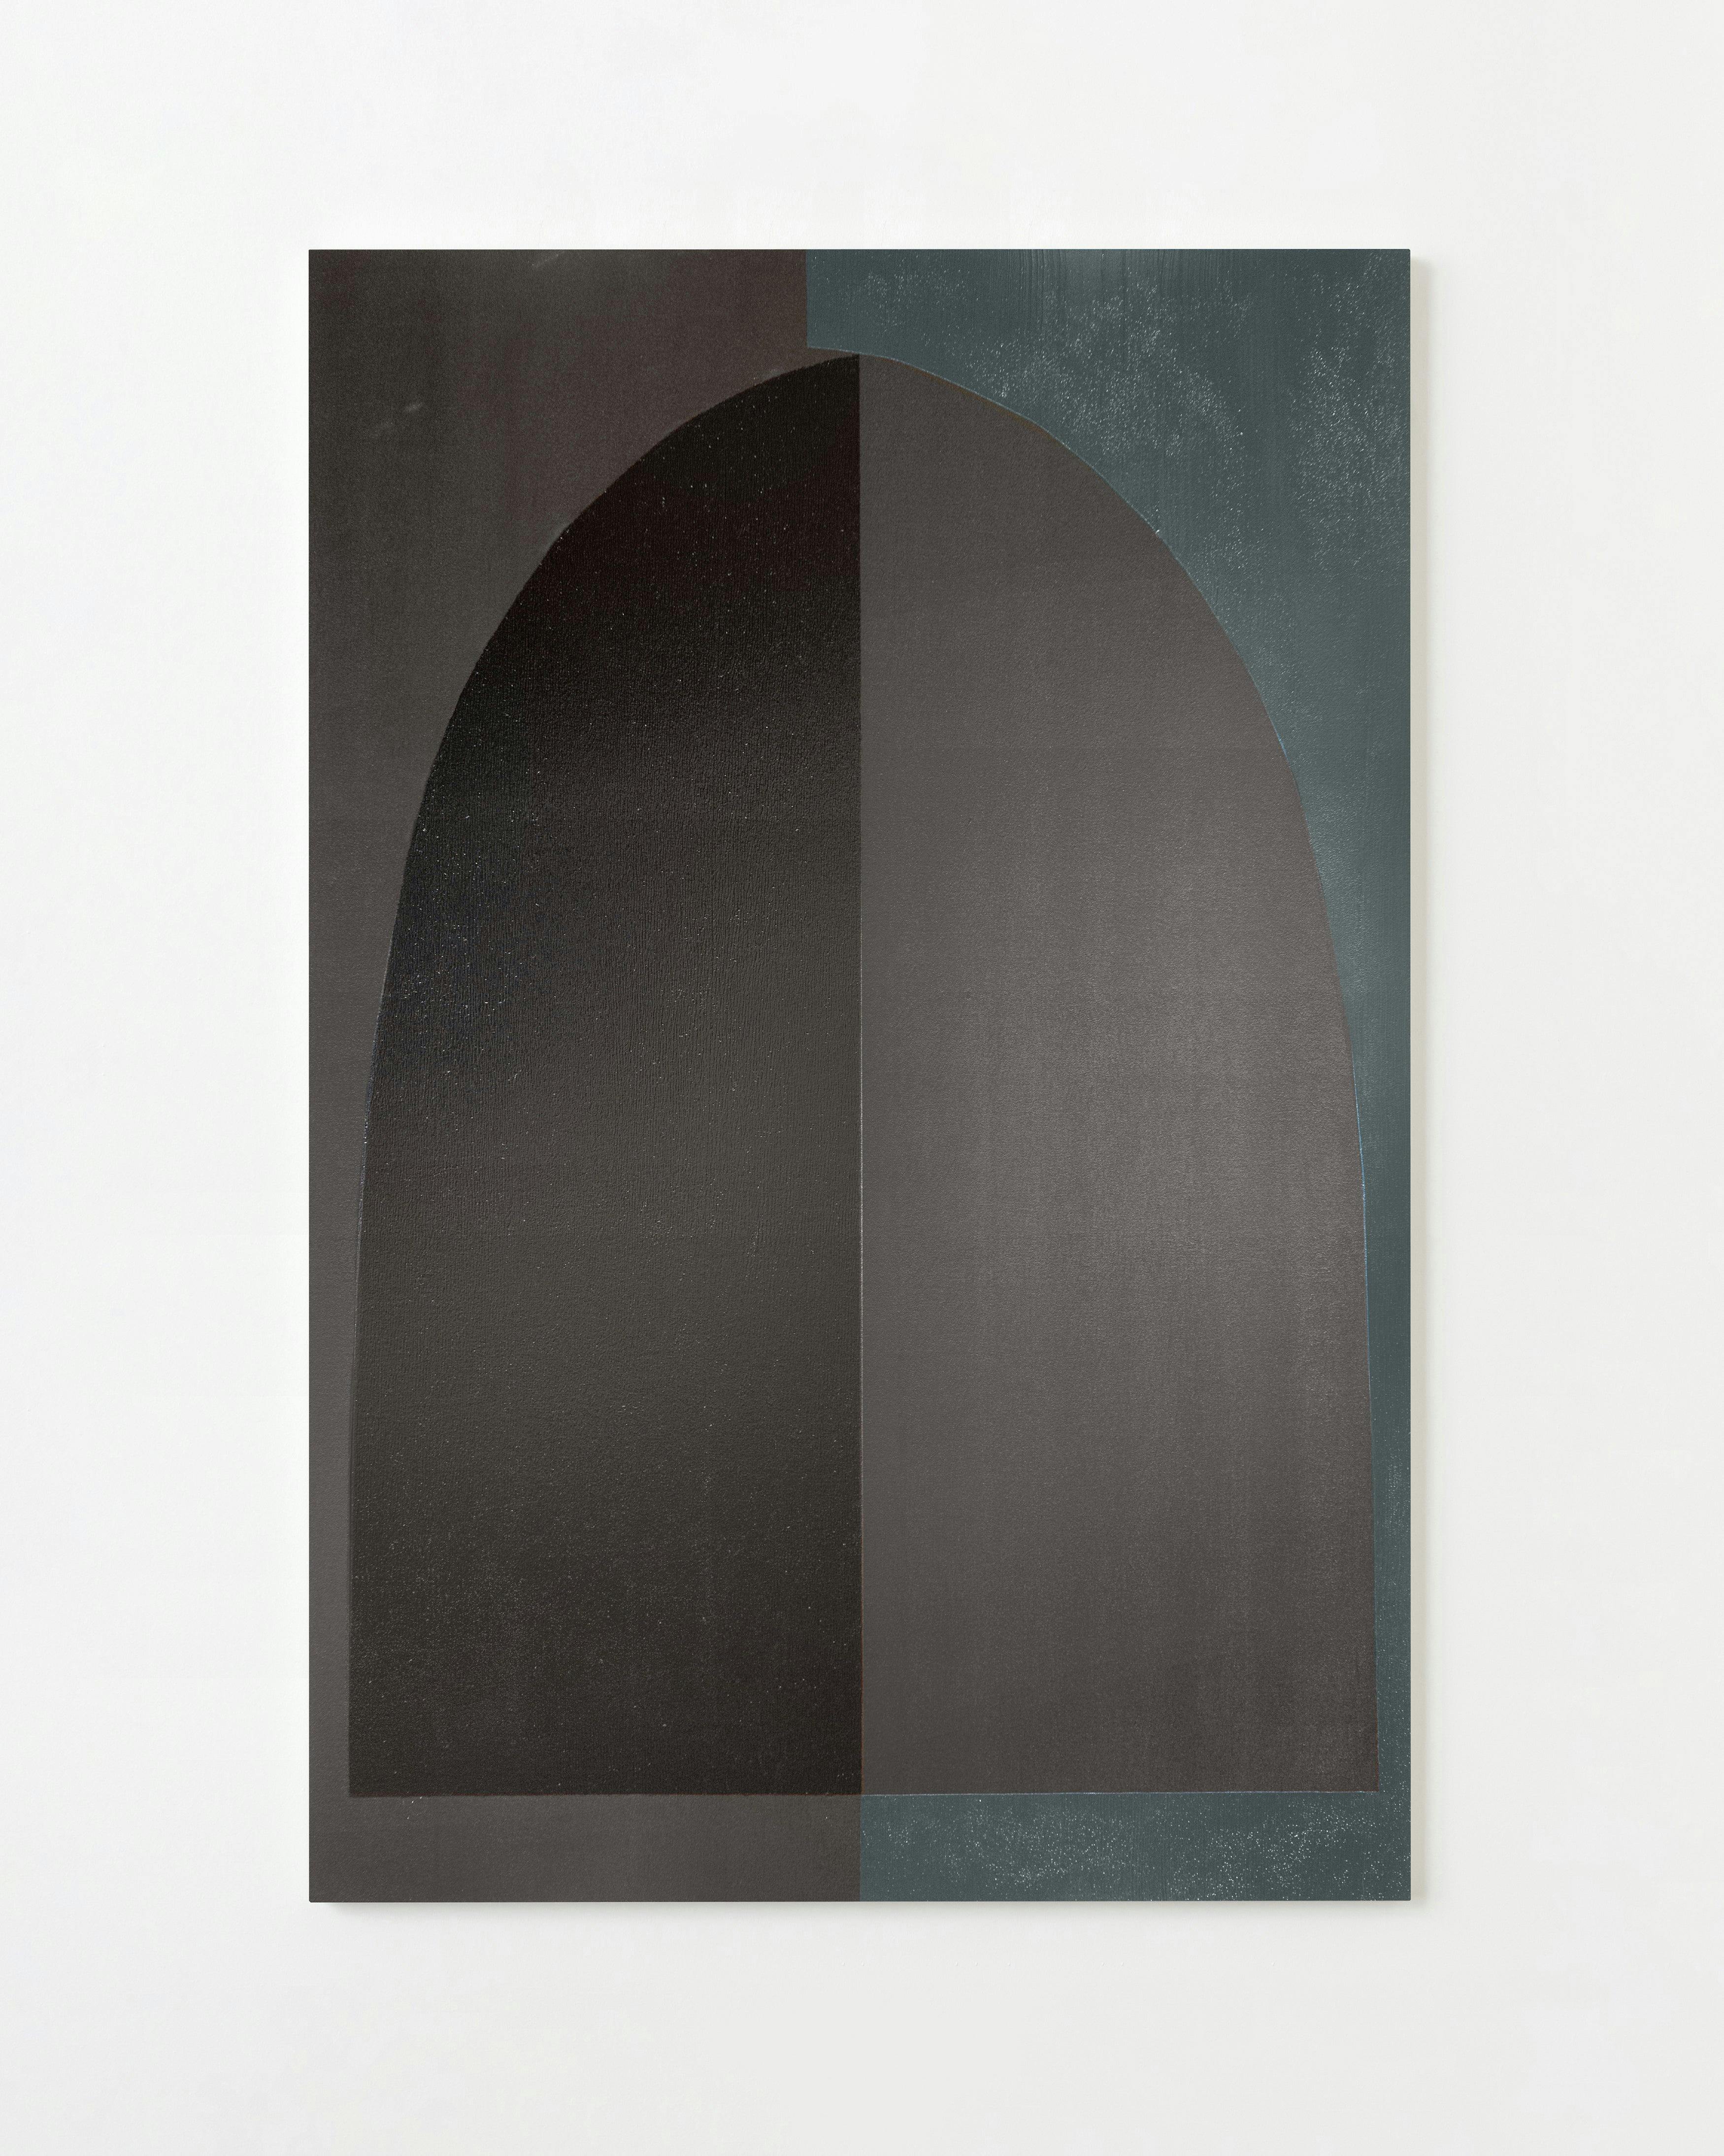 Painting by Aschely Vaughan Cone titled "Blue/Black Arch Doublet".